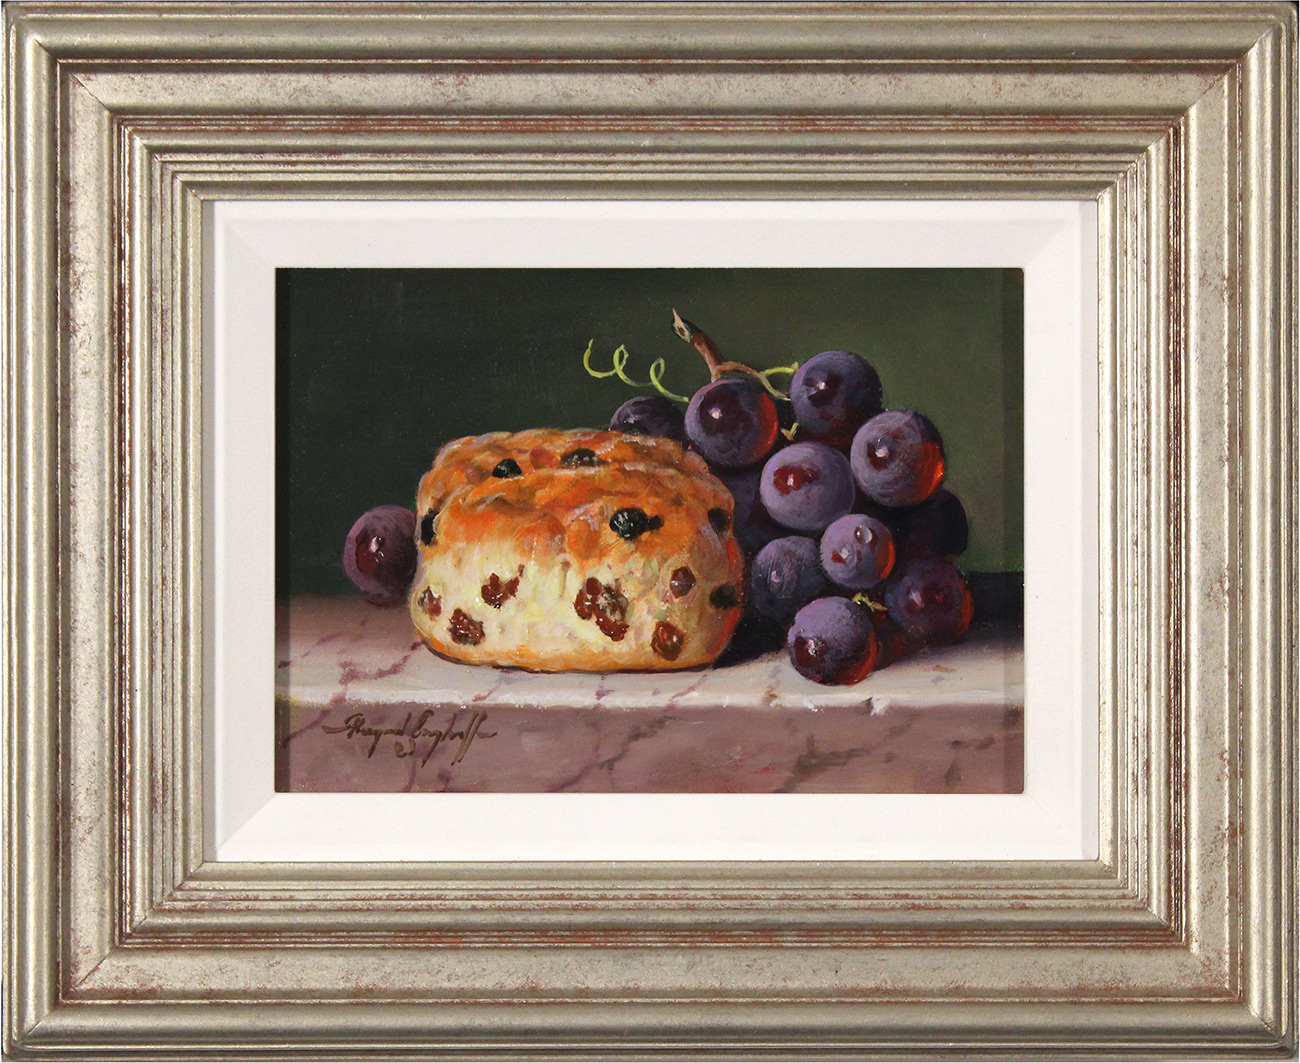 Raymond Campbell, Original oil painting on panel, Scone with Grapes Click to enlarge